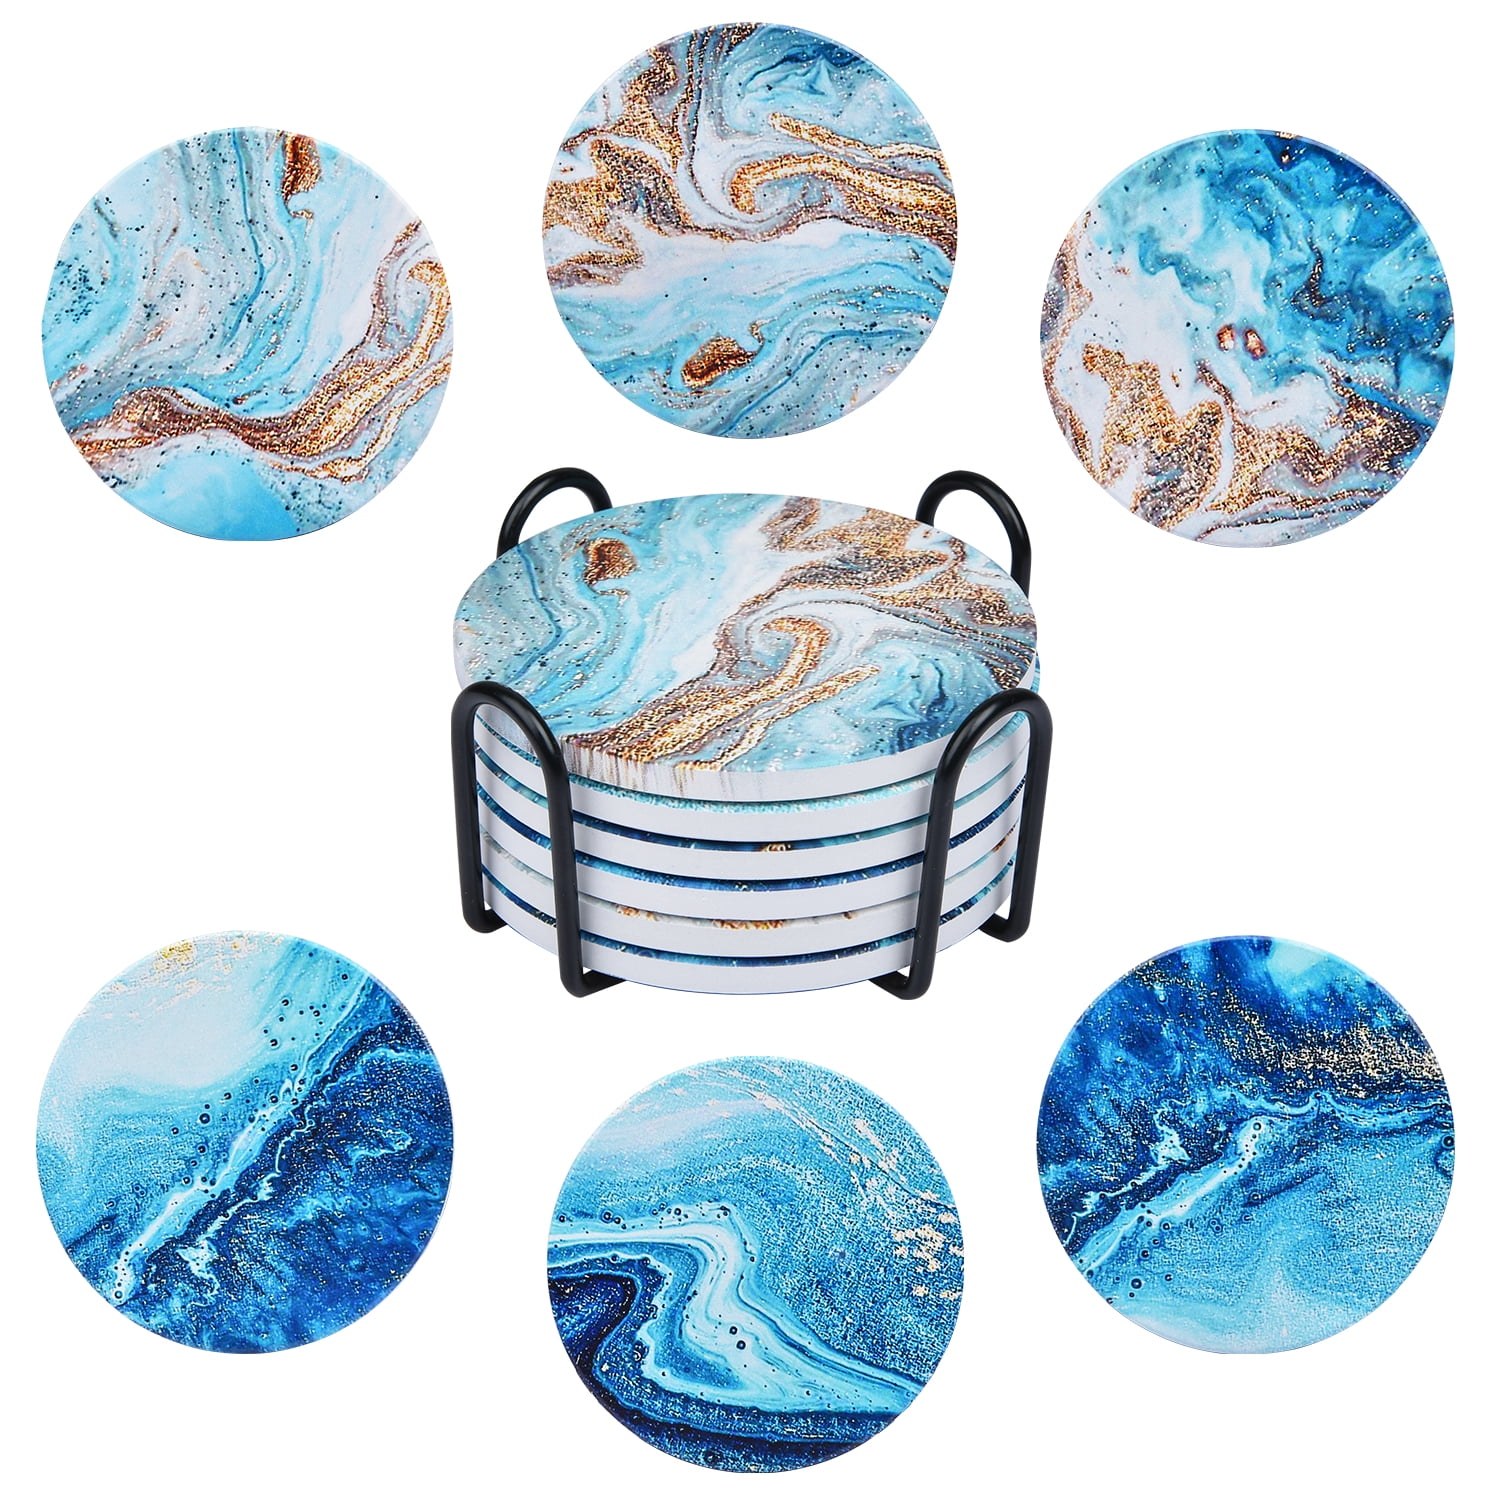 LIFVER Drink Coasters with Holder, Absorbent Coaster Sets of  6, Marble Style Ceramic Drink Coaster for Tabletop Protection,Suitable for  Kinds of Cups, Wooden Table, Cool Home Decor, 4 Inches: Coasters